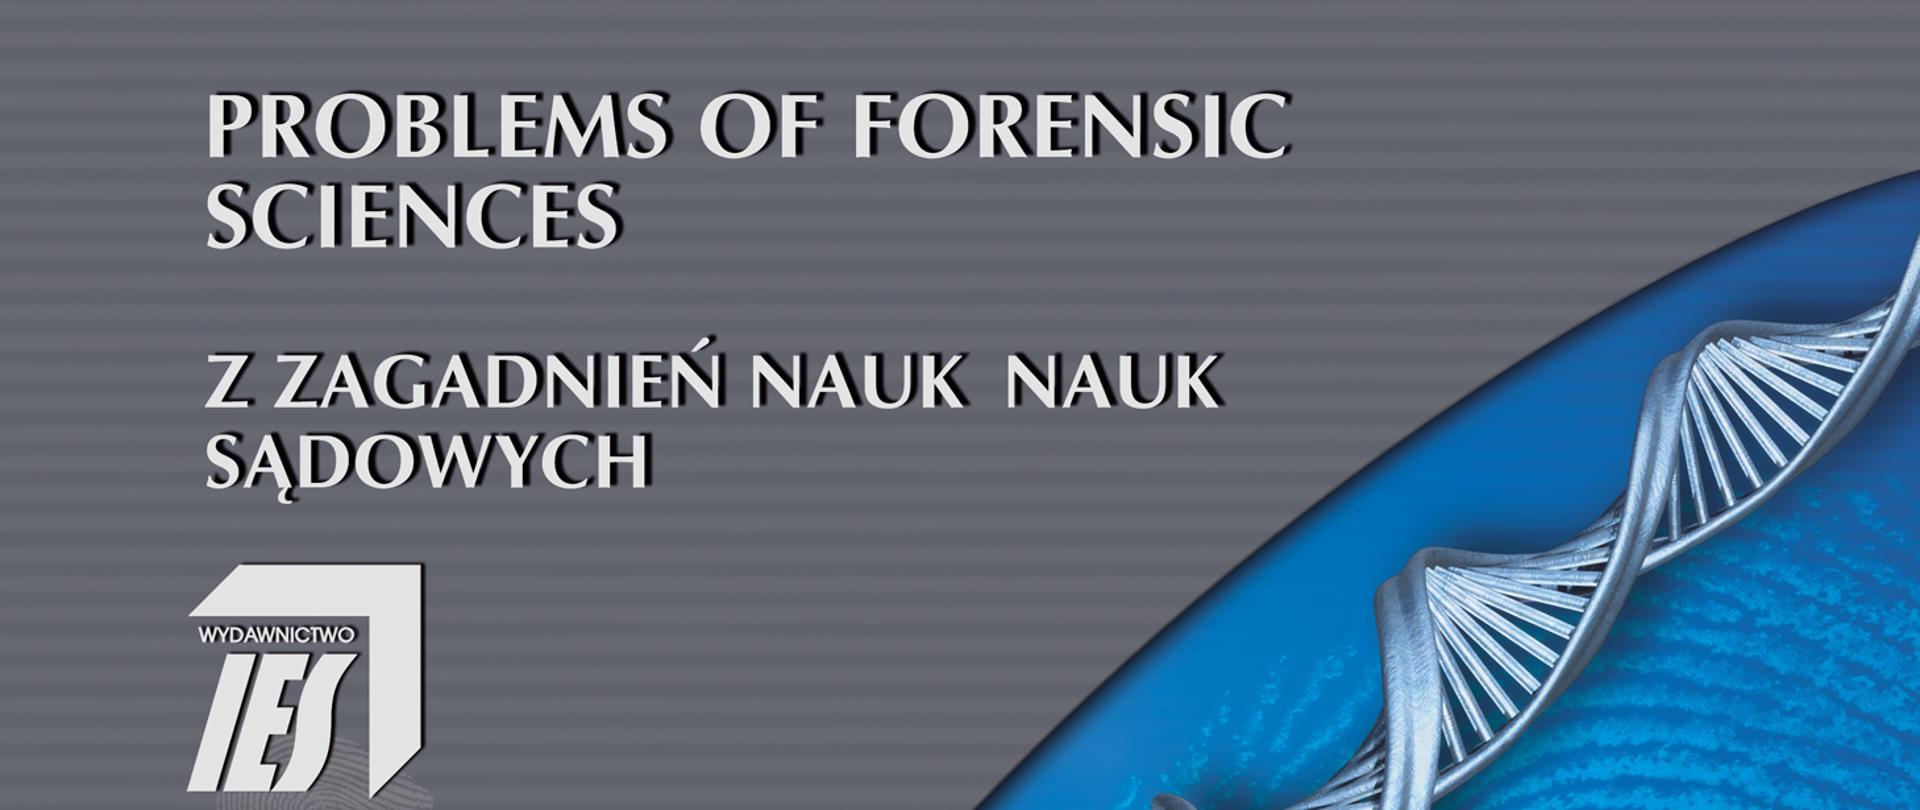 Problems of Forensic Sciences-baner